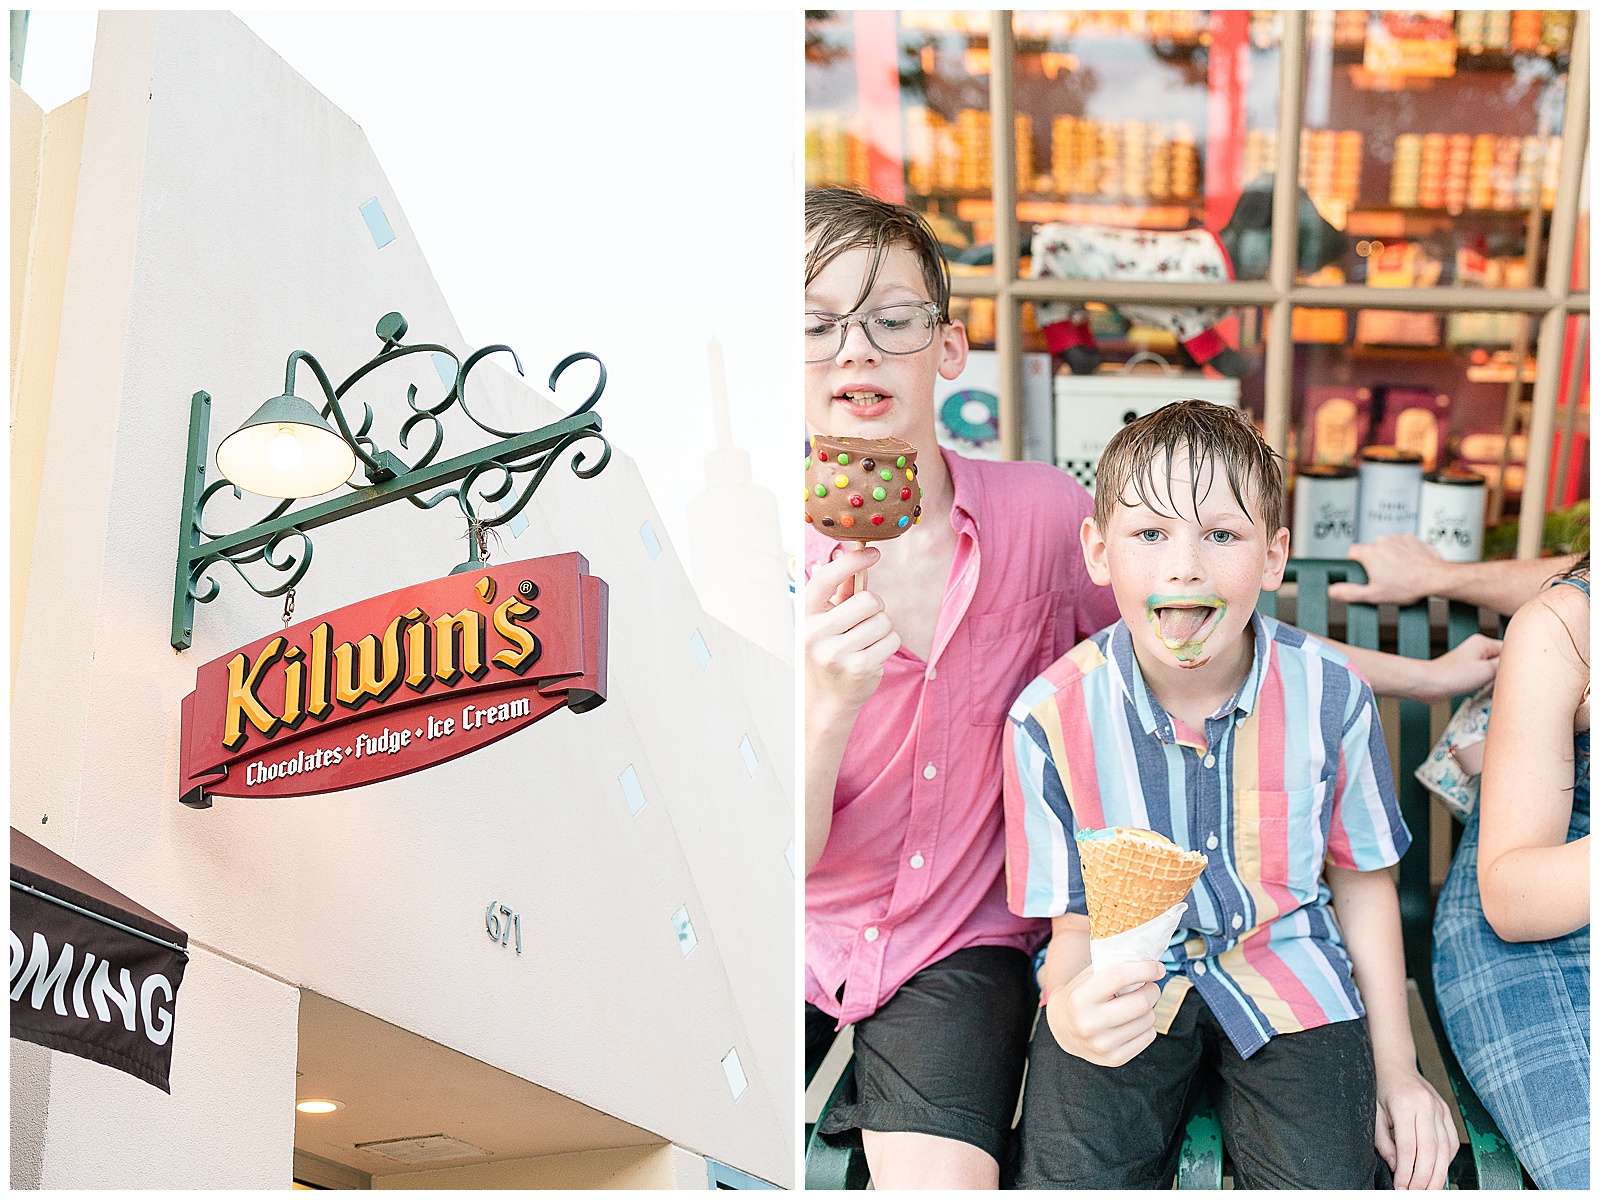 Ice cream at Kilwins after Fun family photos in Celebration, FL